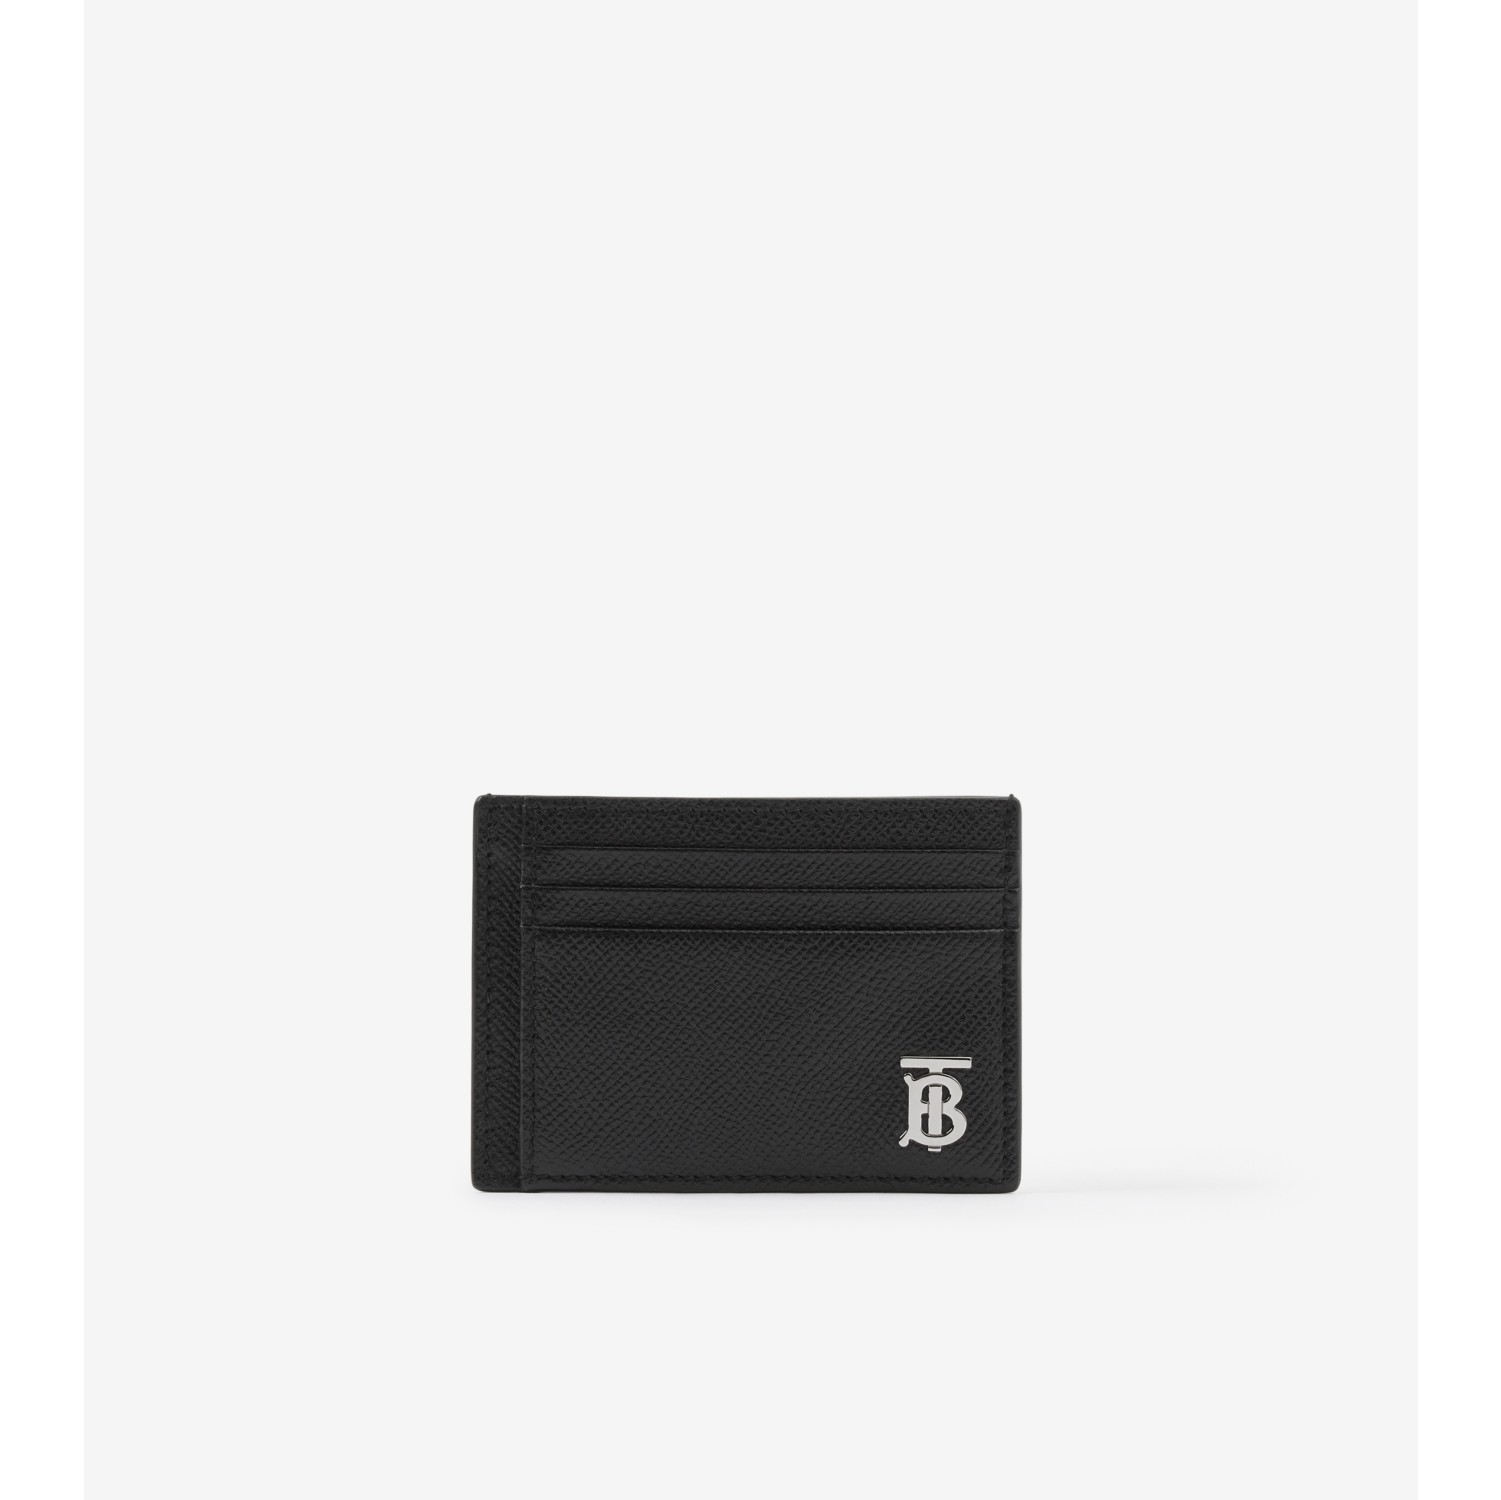 Grainy Leather TB Money Clip Official Card Burberry® | Black Case - Men in